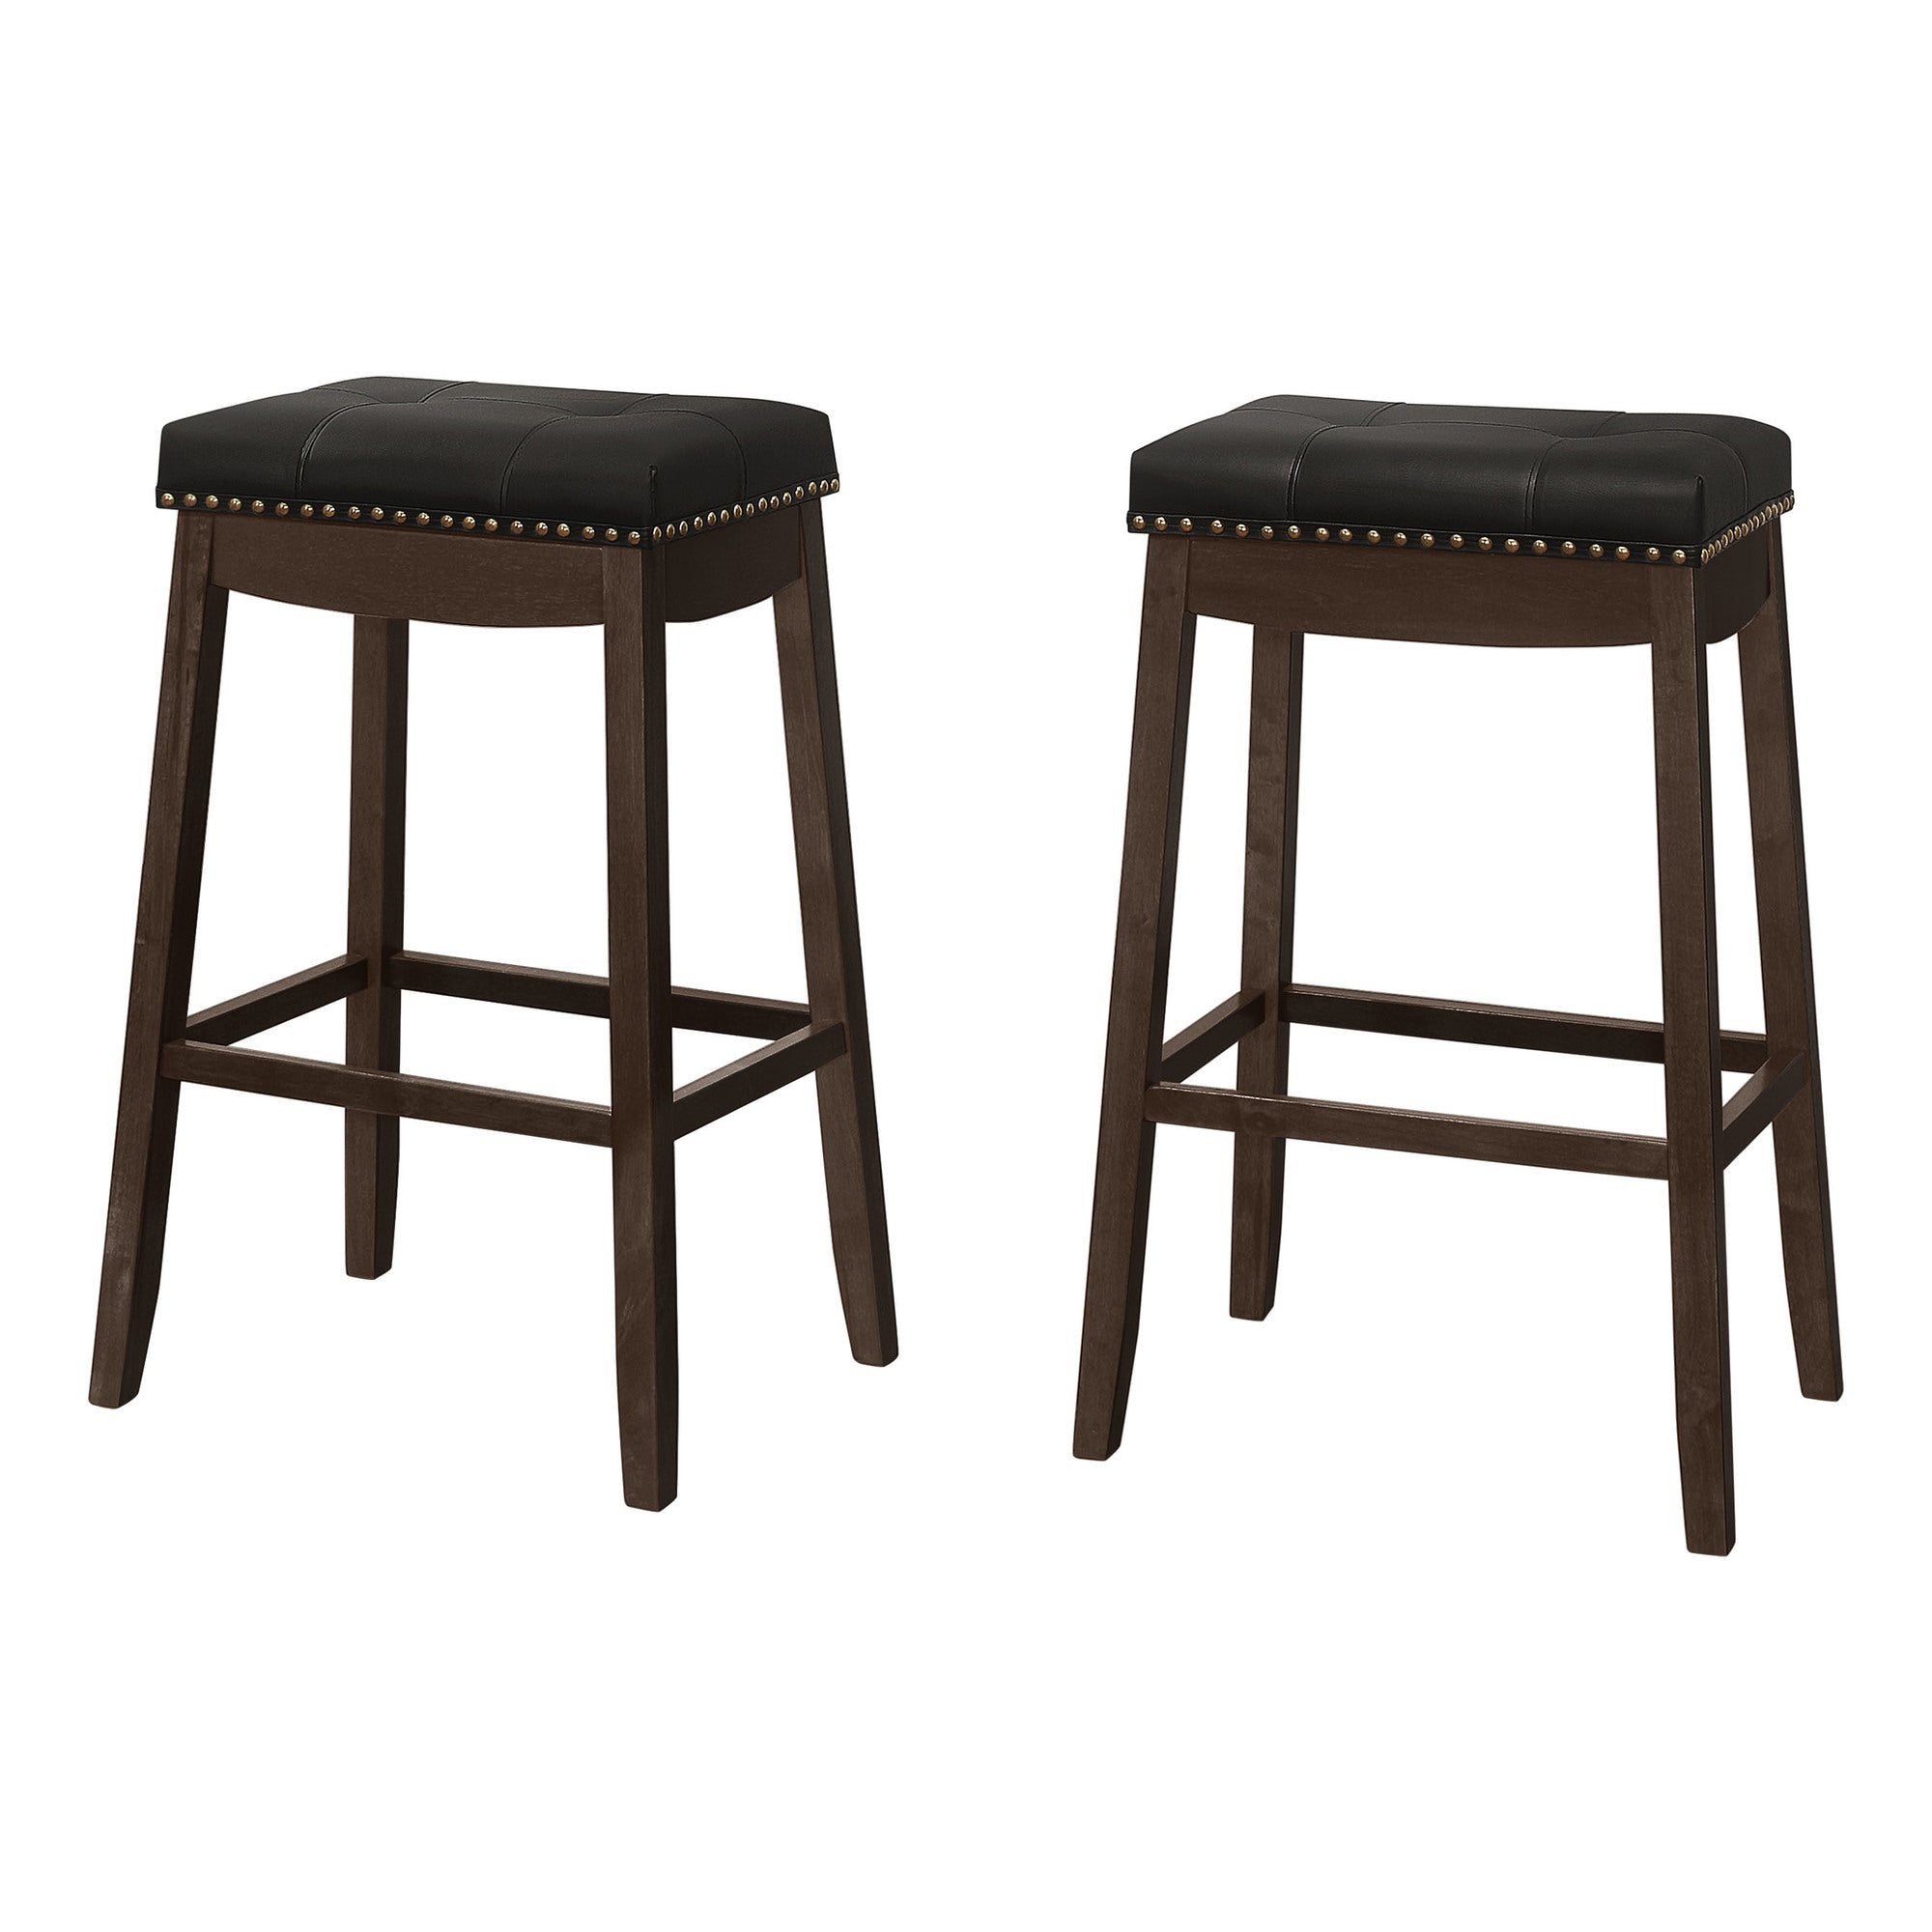 MN-181260    Bar Stool, Set Of 2, Bar Height, Saddle Seat, Solid Wood, Leather Look, Black, Espresso, Traditional